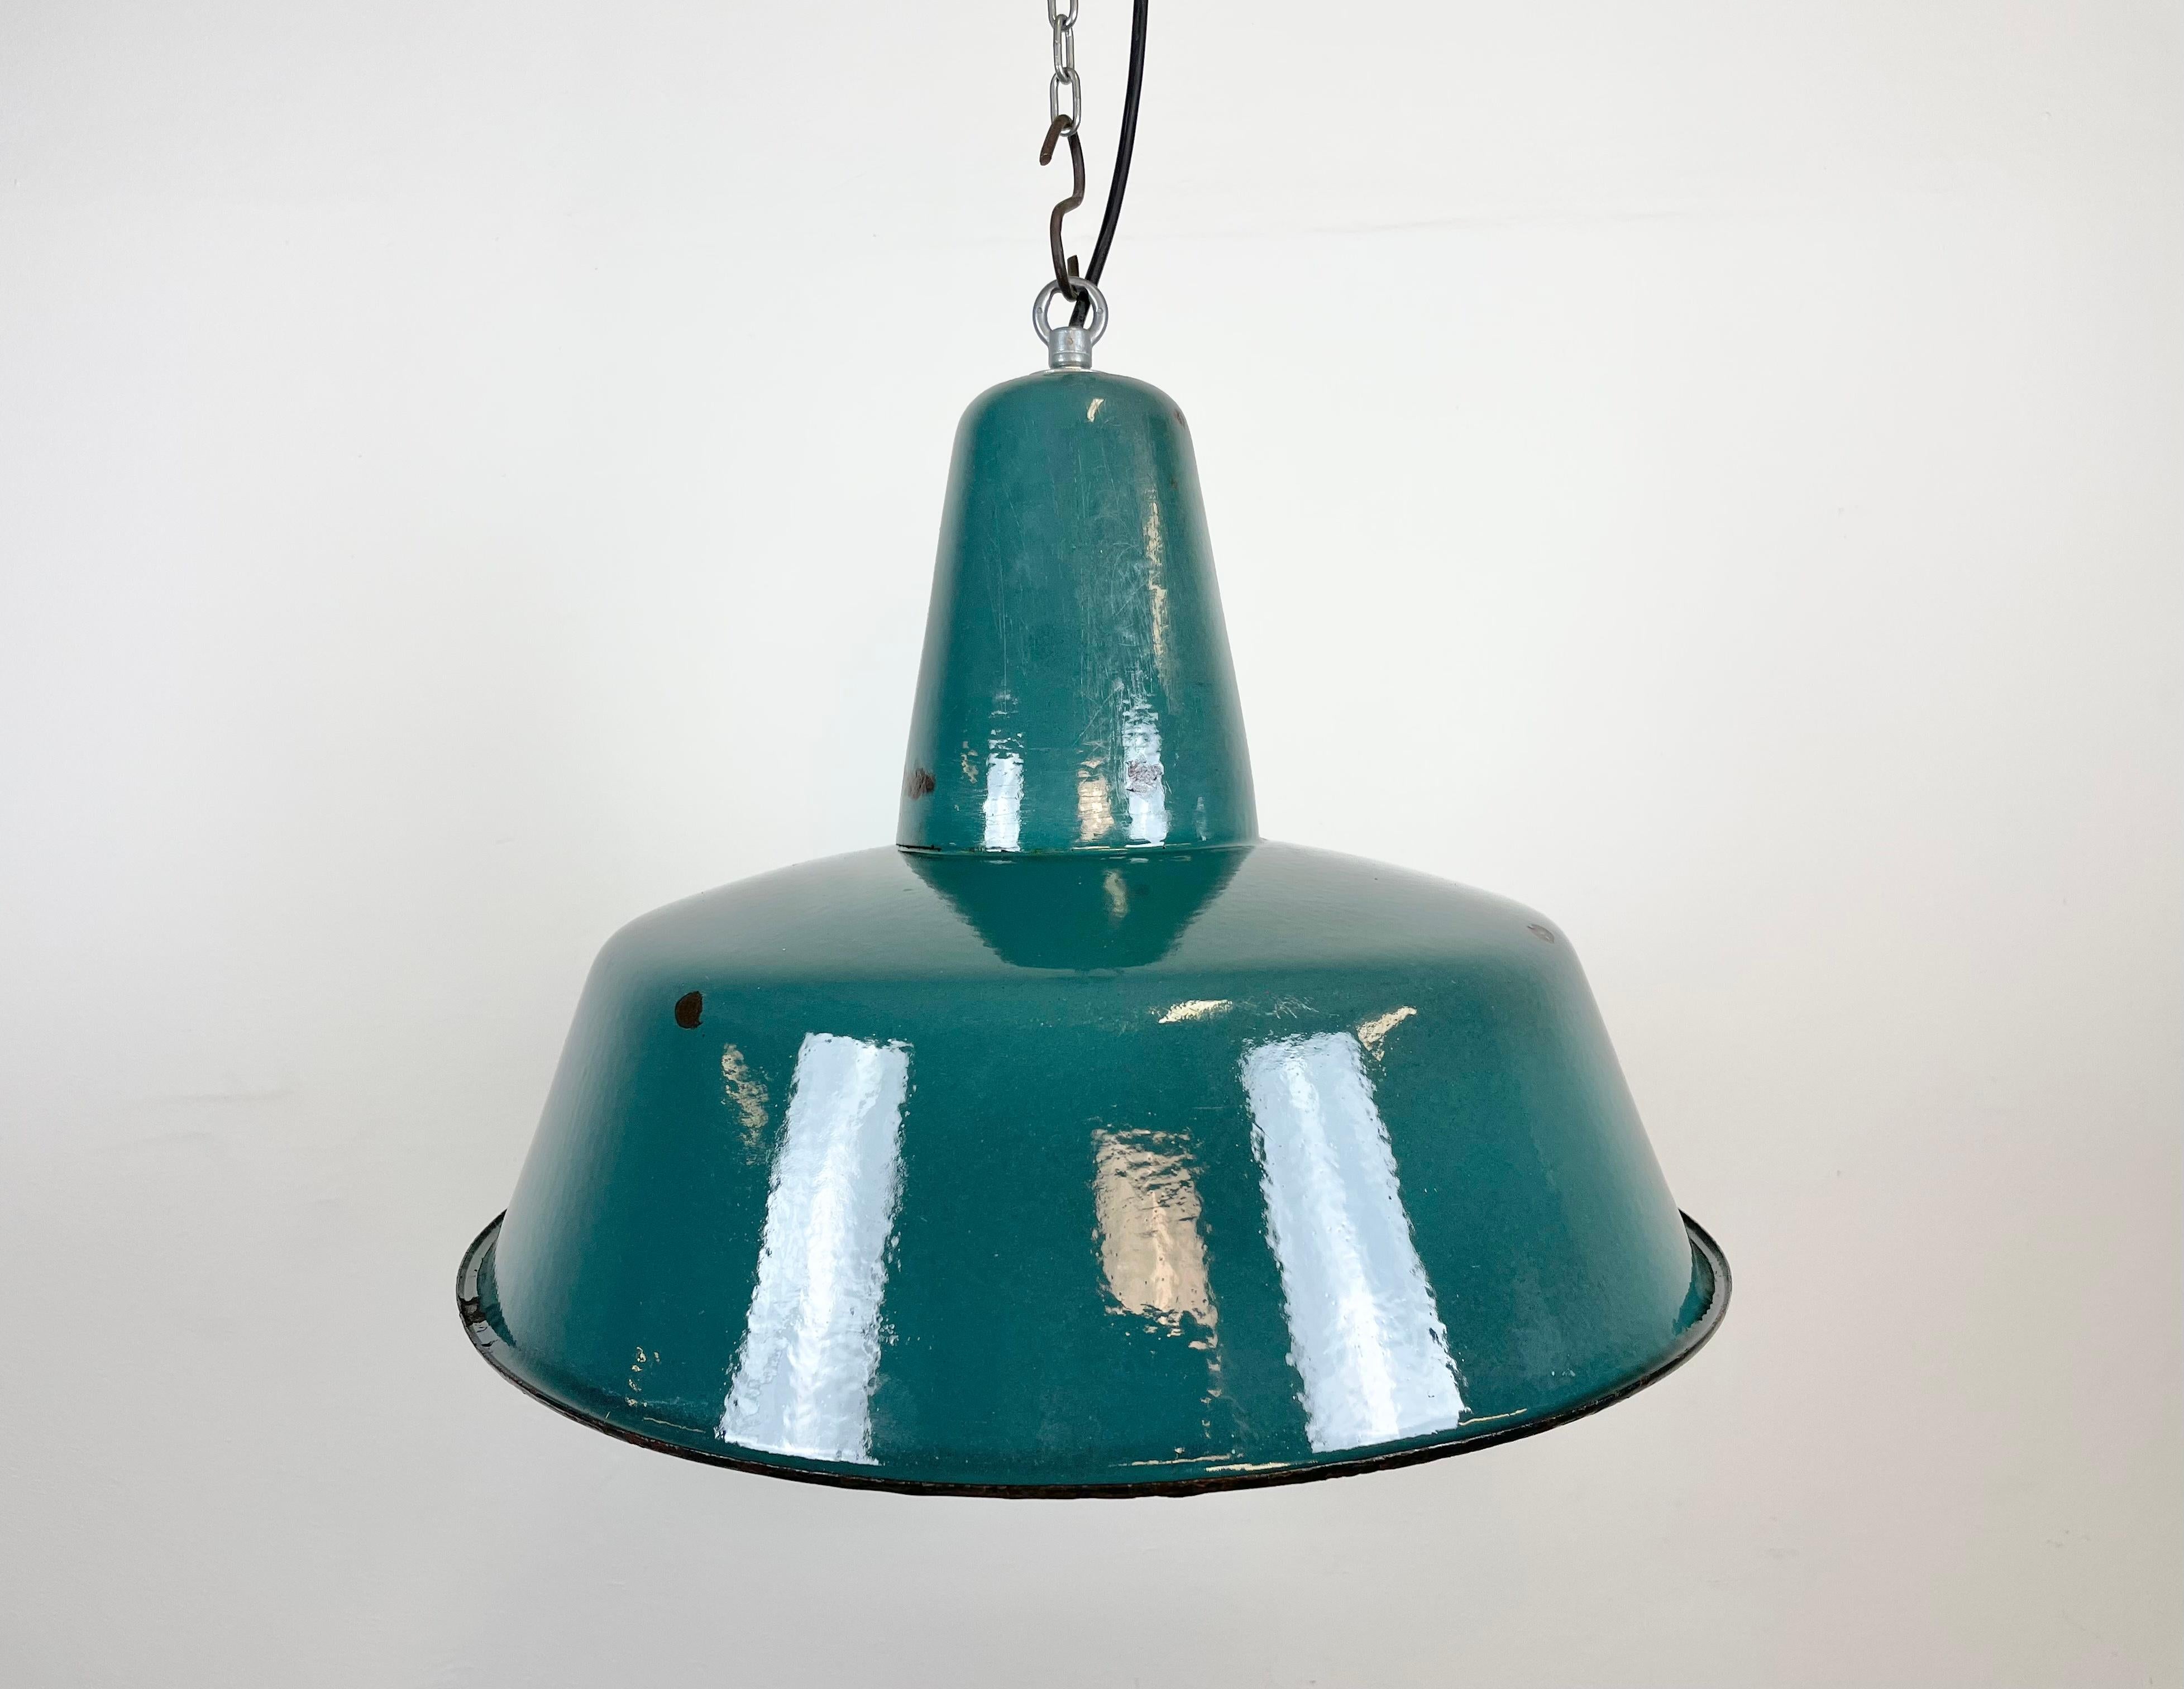 Industrial green enamel pendant light made in Poland during the 1960s. White enamel inside the shade. Iron top. The socket requires E 27 light bulbs. New wire. Fully functional. The weight of the lamp is 1,8 kg.